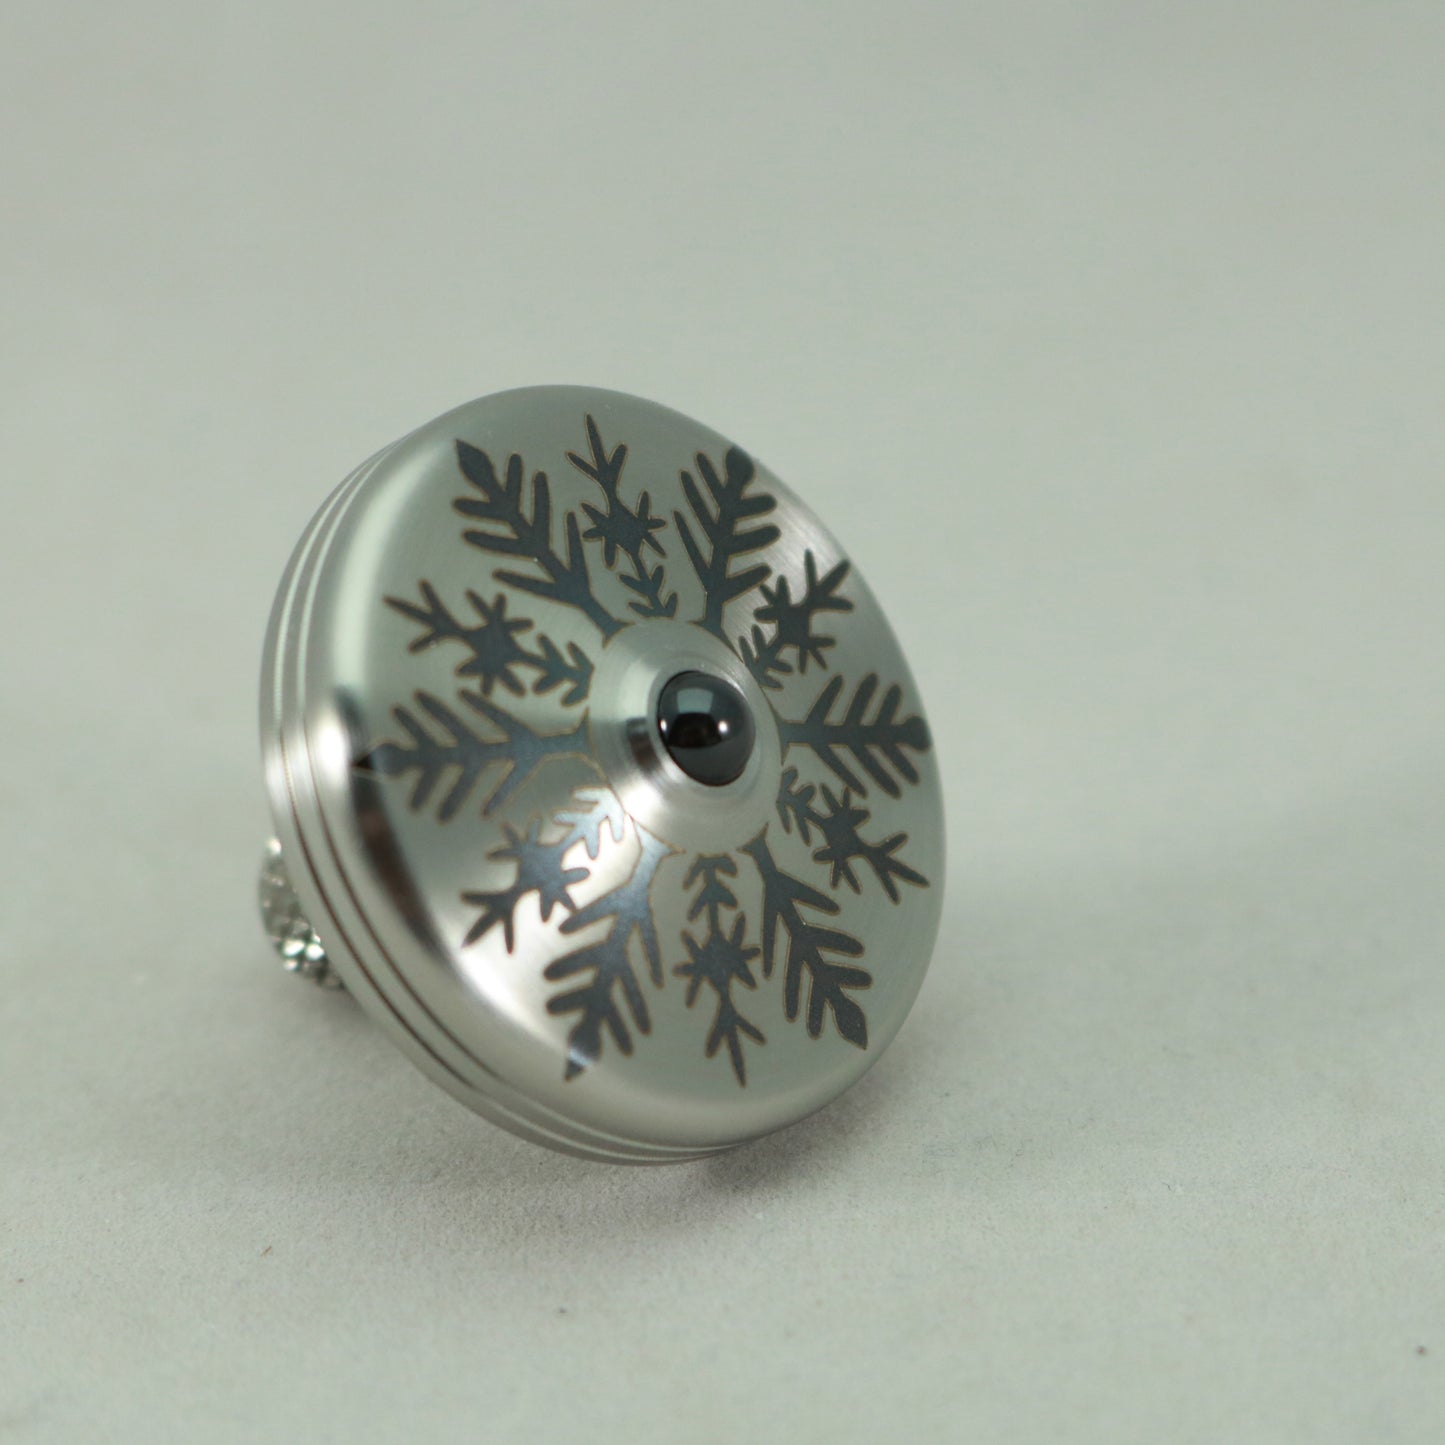 S2- Laser Etched Snowflake on a Stainless Steel Spinning Top